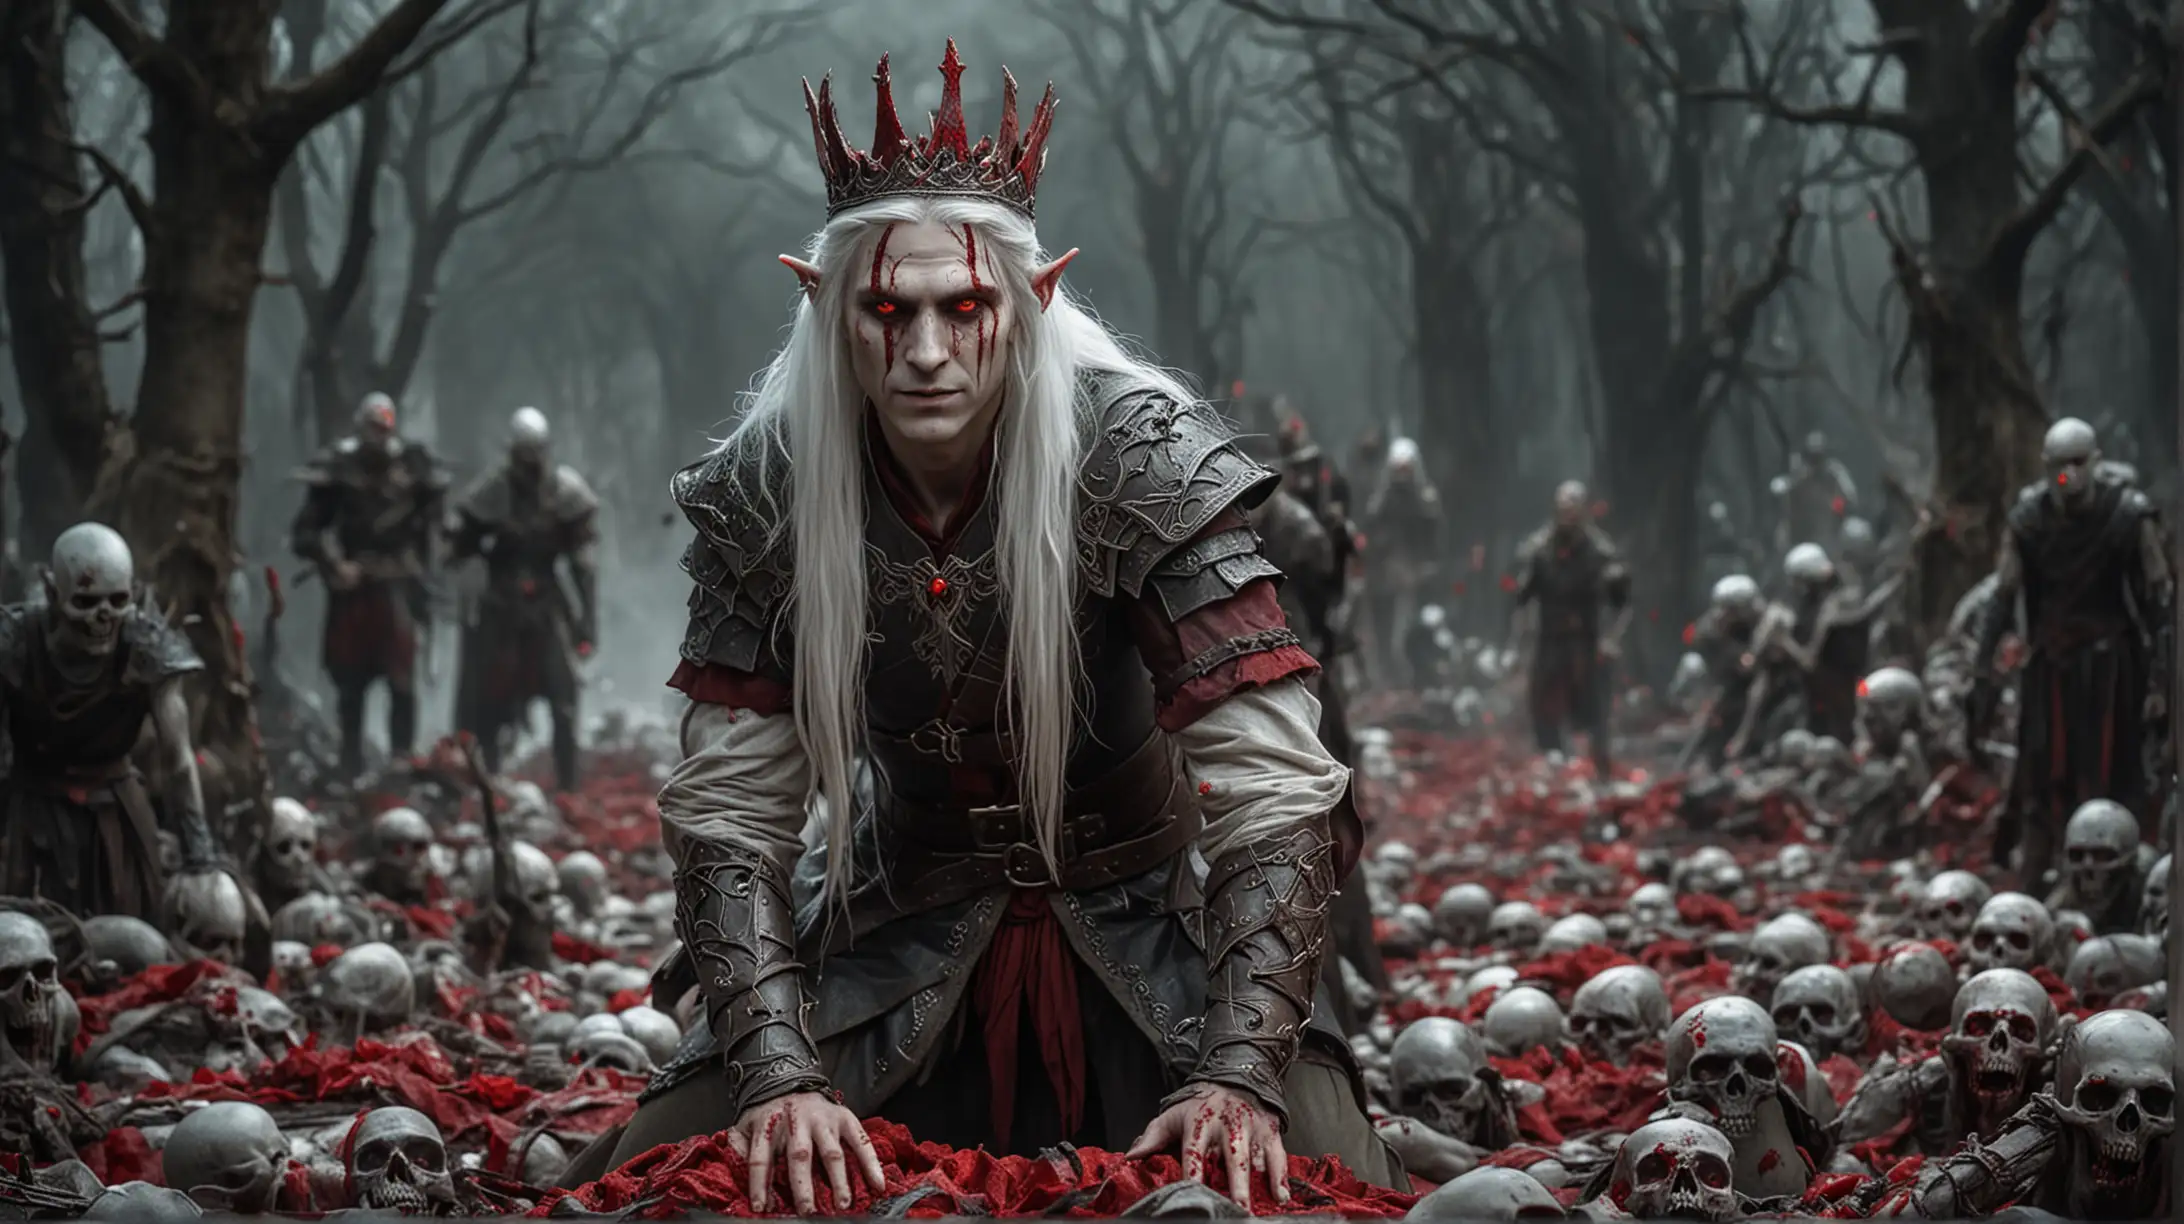 Menacing Elf King Standing on Pile of Corpses with Blood Red Crown